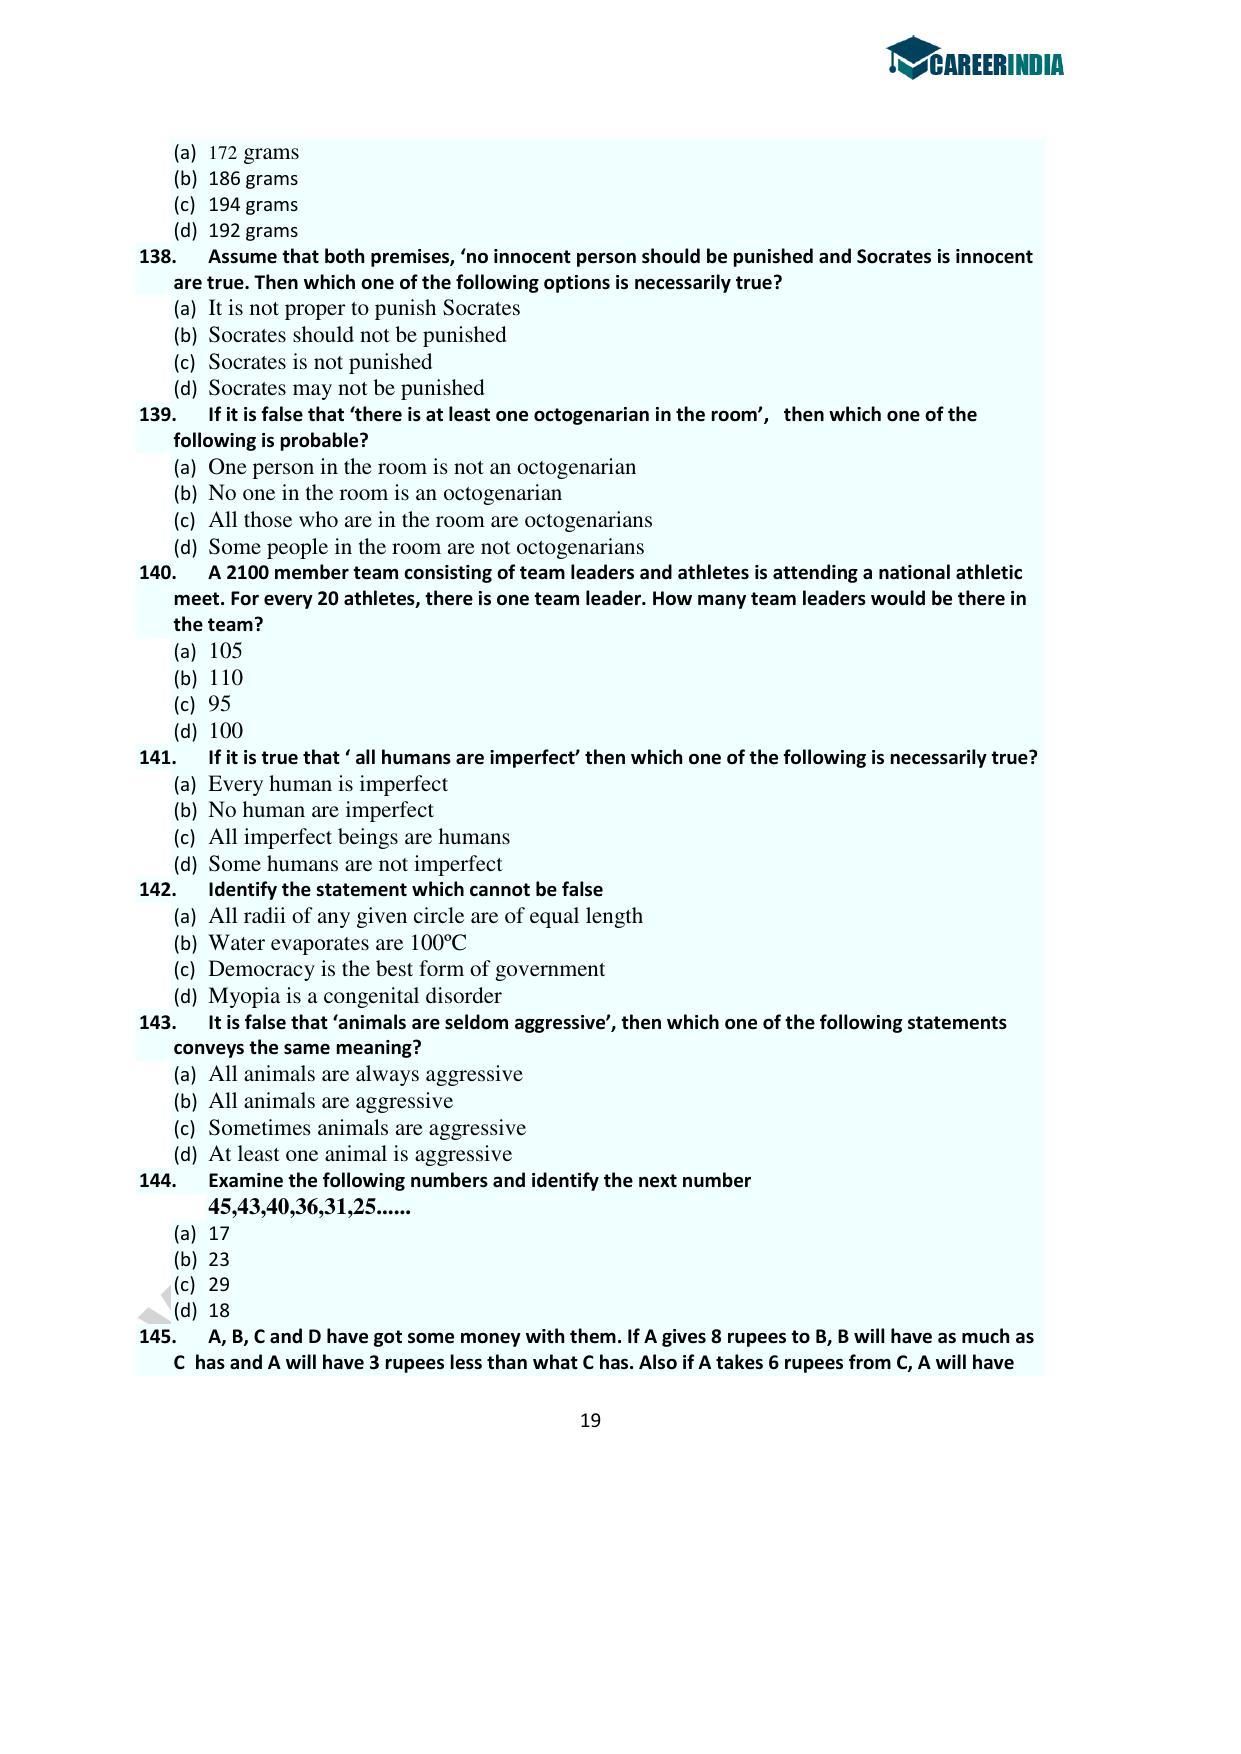 CLAT 2016 UG Question Paper with Answer Key - Page 19